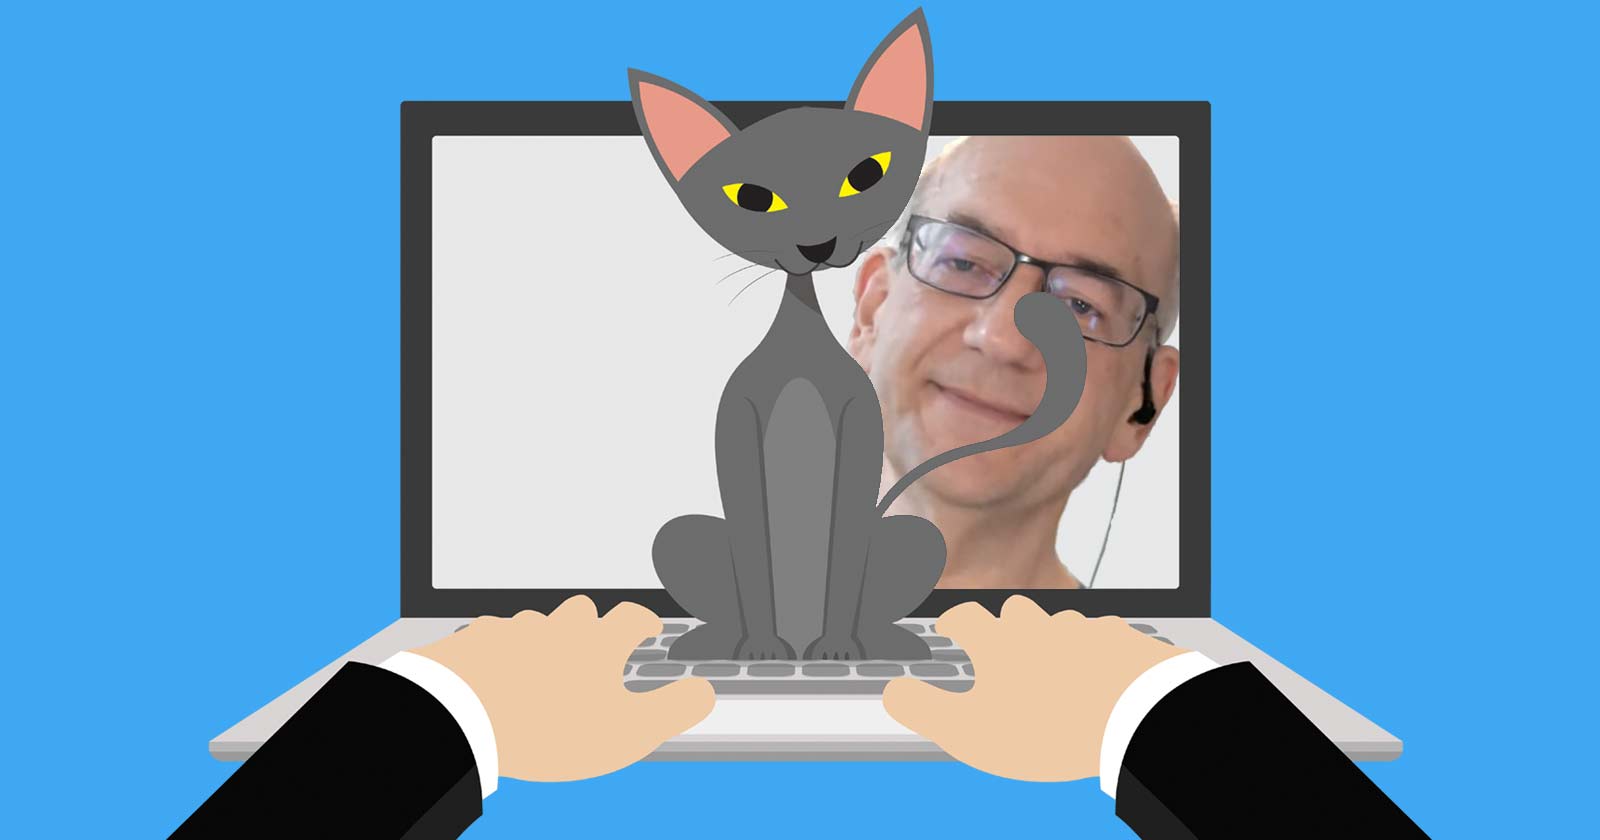 Image of a cat sitting on a laptop, obscuring the image Google's John Mueller that is peering from the laptop screen